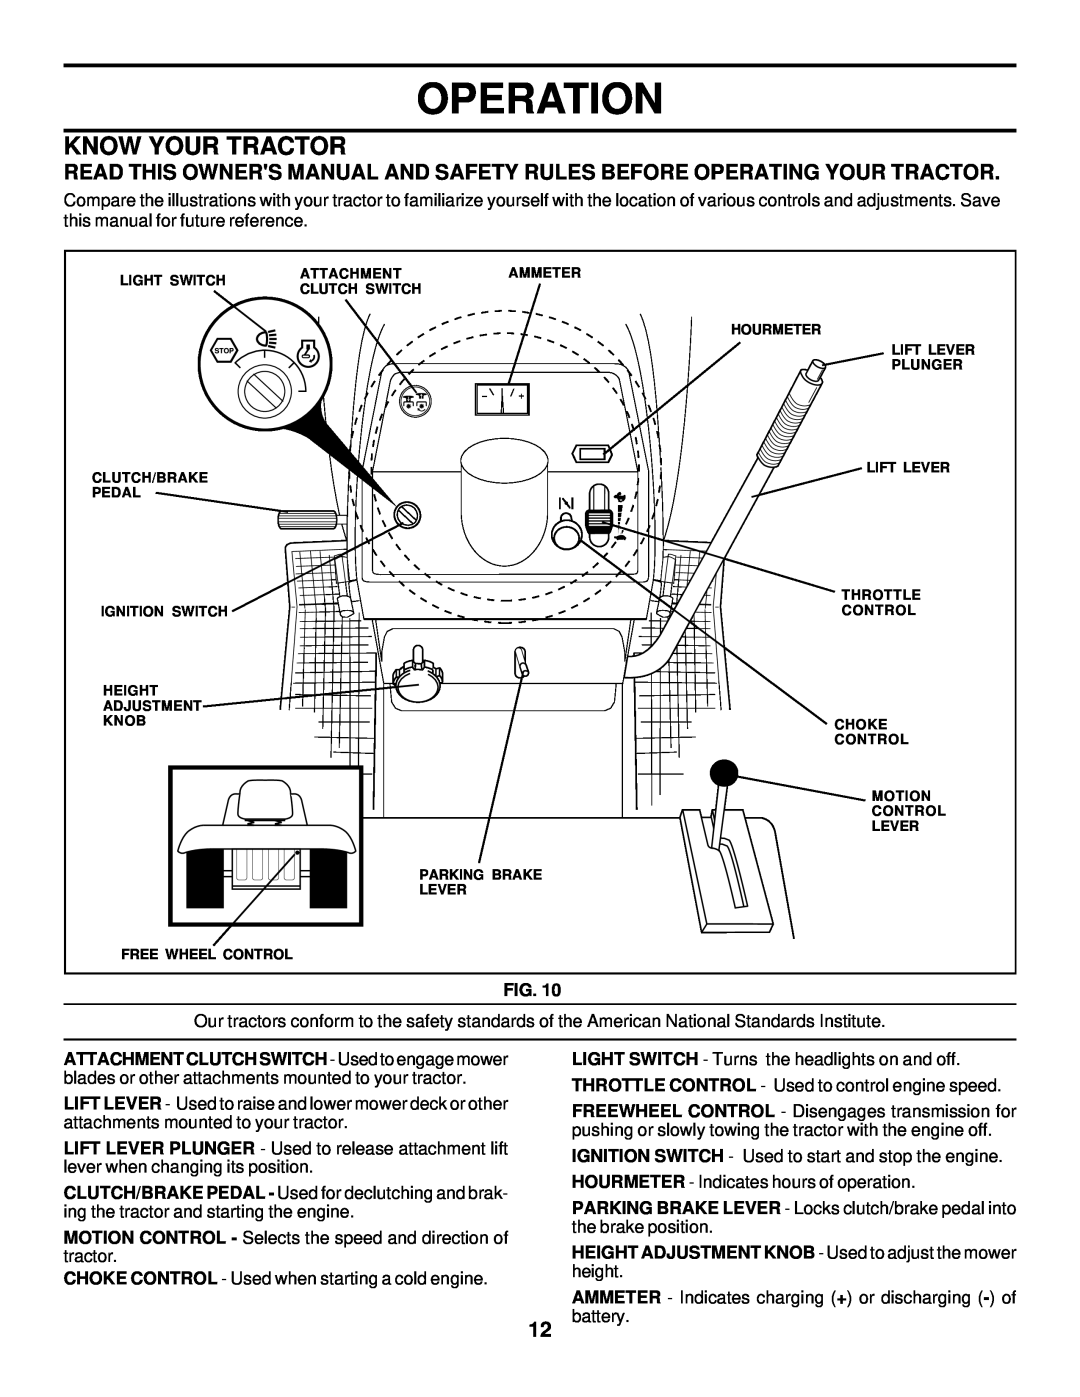 Husqvarna GTH225 owner manual Know Your Tractor, Operation, HEIGHT ADJUSTMENT KNOB - Used to adjust the mower height 